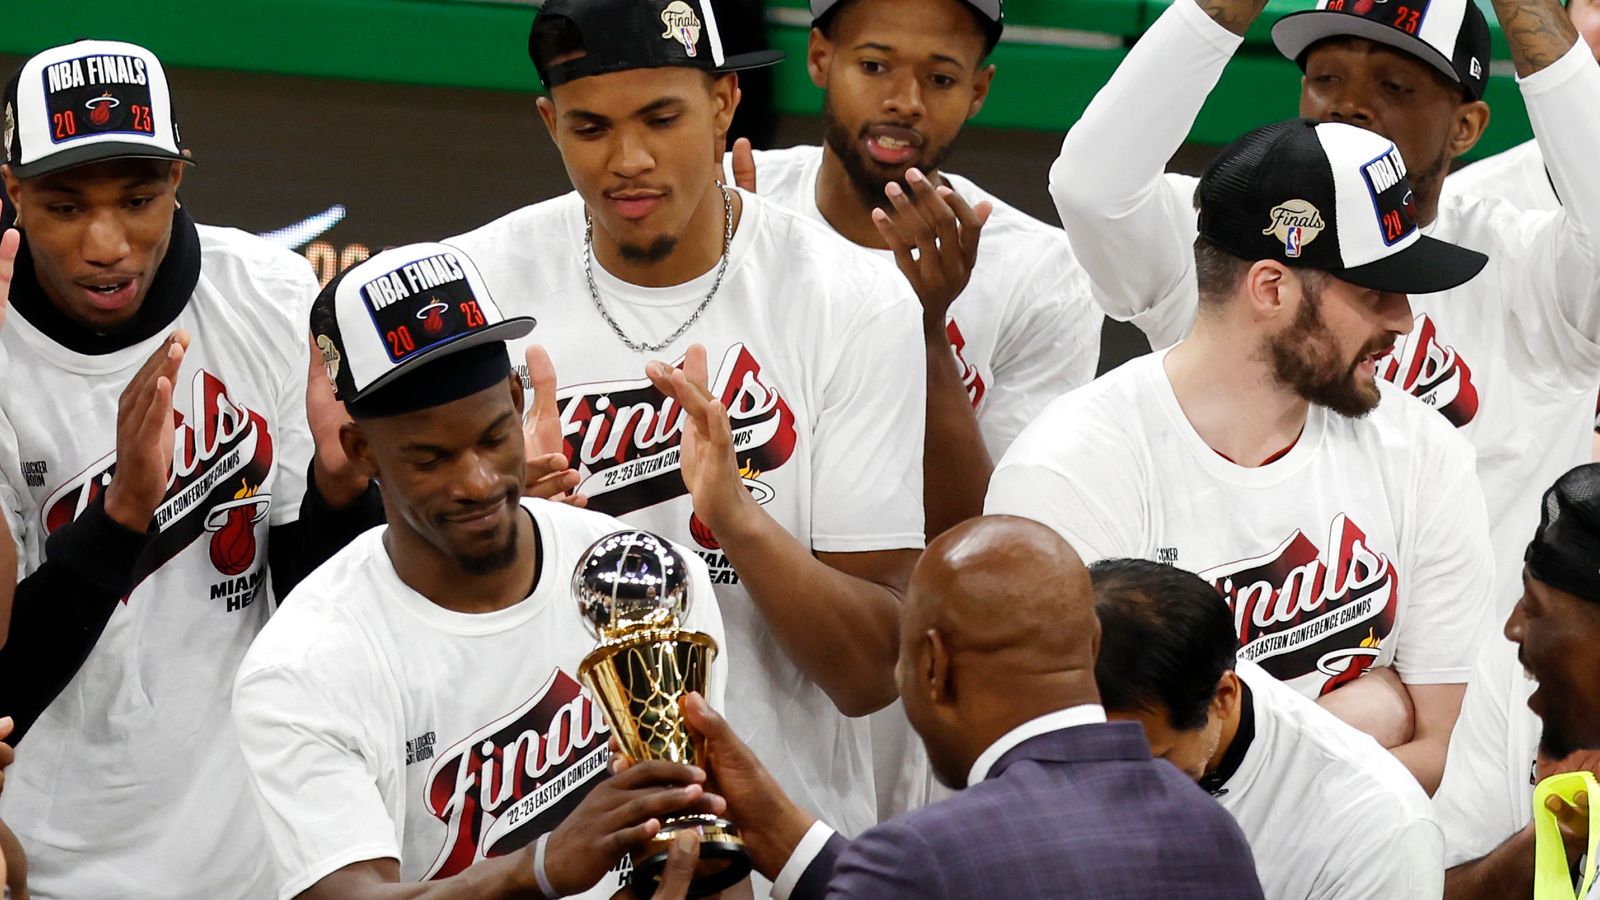 Miami Heat, History, Prominent Players, & Championships